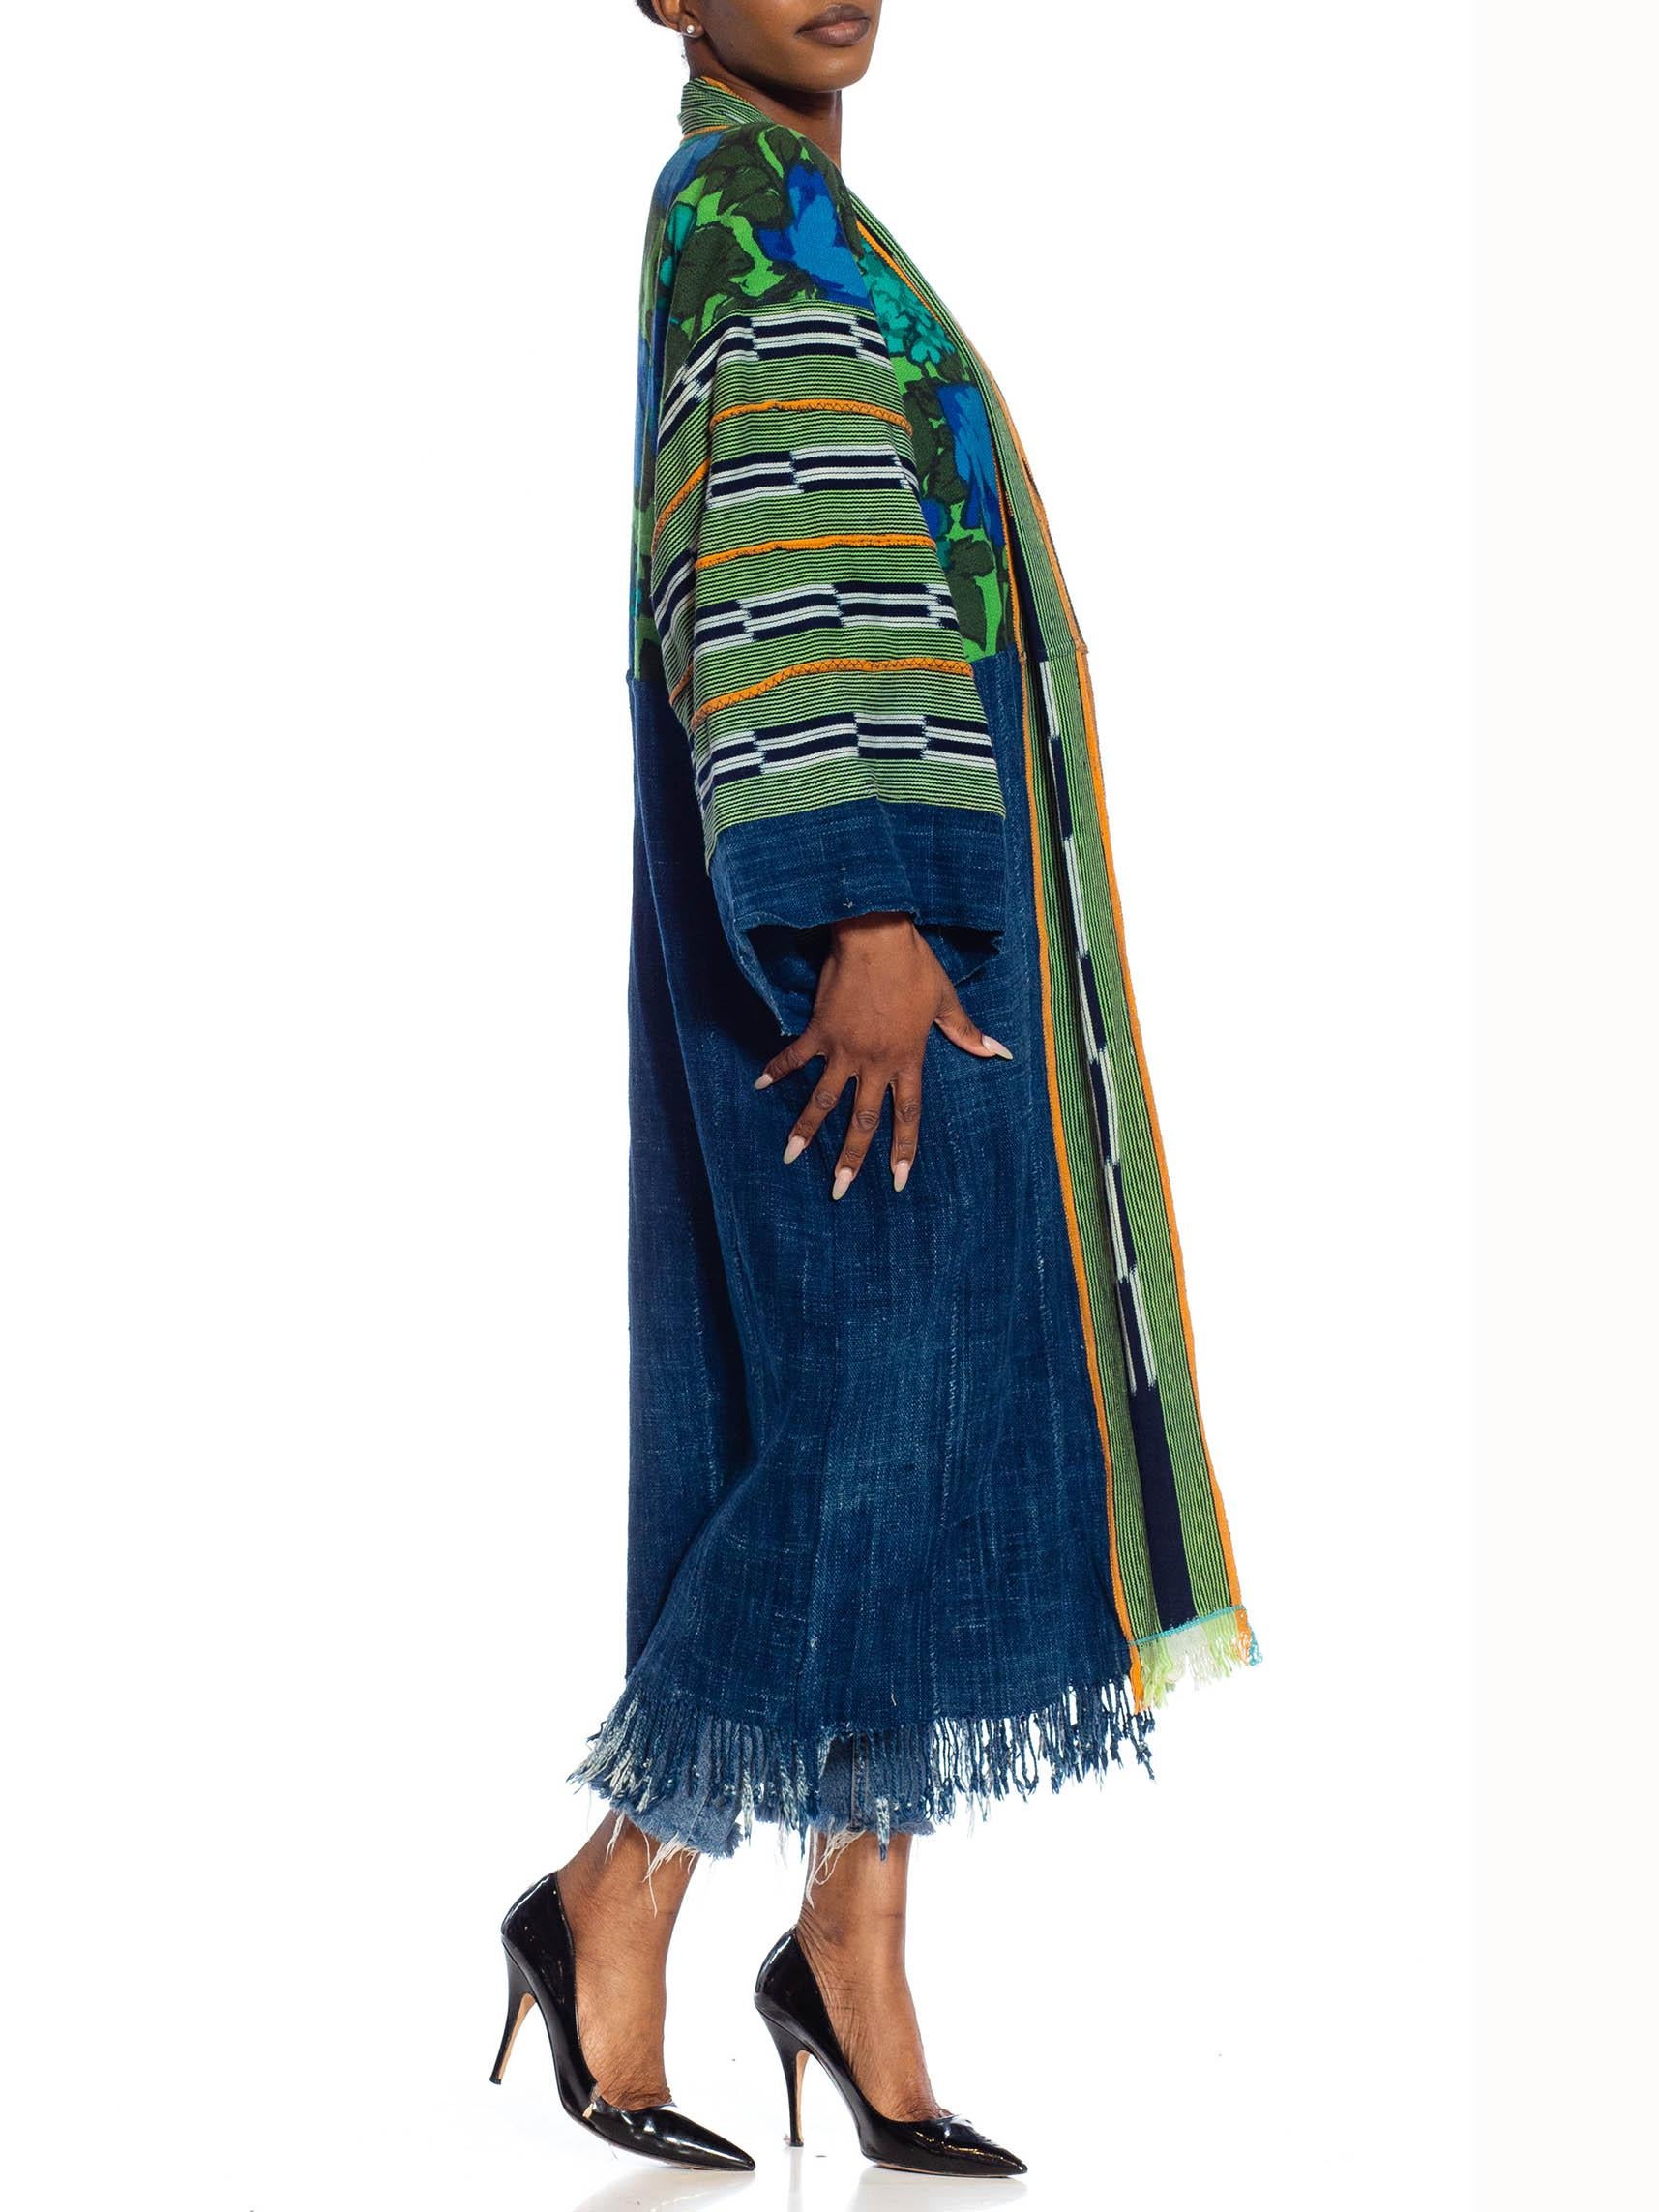 MORPHEW COLLECTION Navy Blue & Green African Cotton Vintage 1960S Floral Duster
MORPHEW COLLECTION is made entirely by hand in our NYC Ateliér of rare antique materials sourced from around the globe. Our sustainable vintage materials represent over